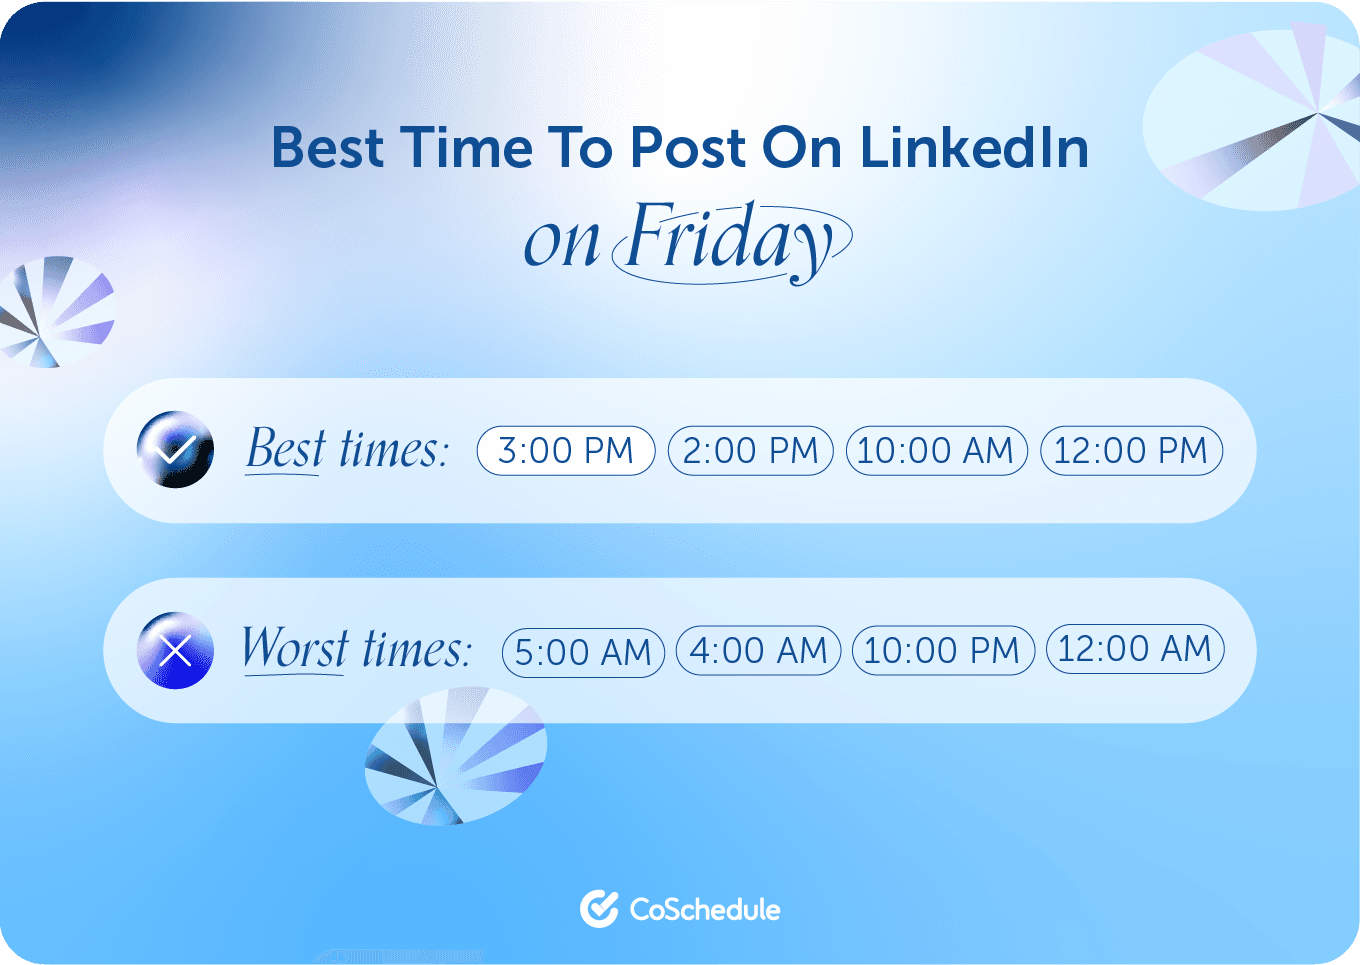 CoSchedule graphic on the best times to post on LinkedIn Friday